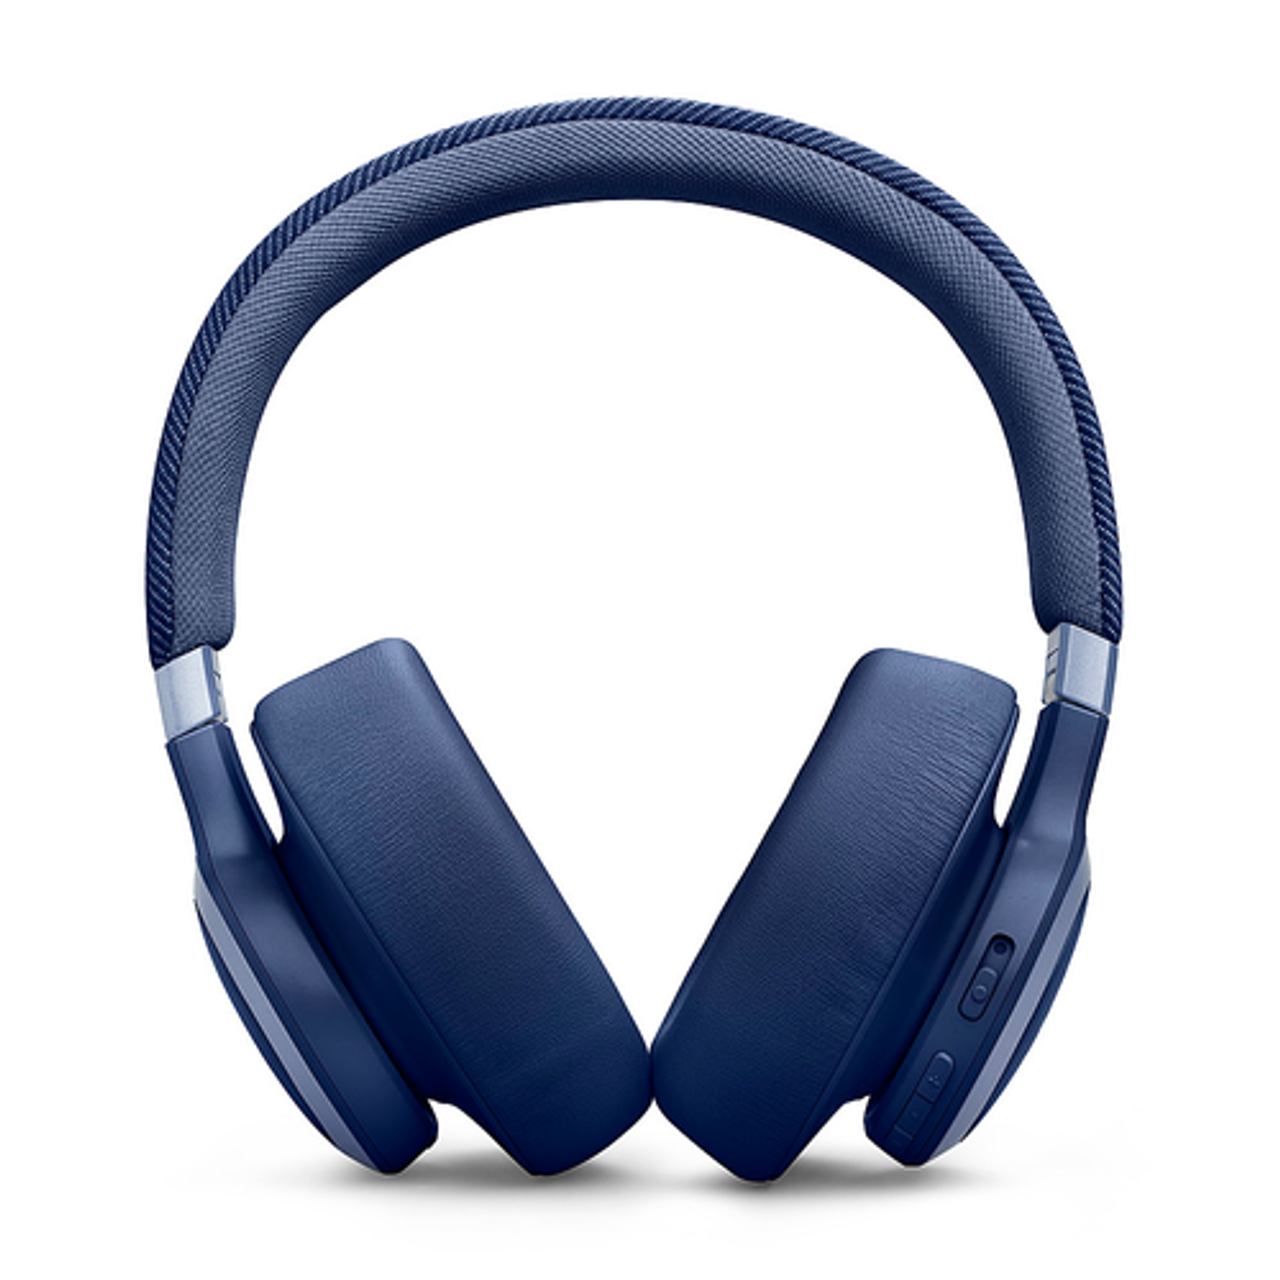 JBL - Wireless Over-Ear Headphones with True Adaptive Noise Cancelling - Blue